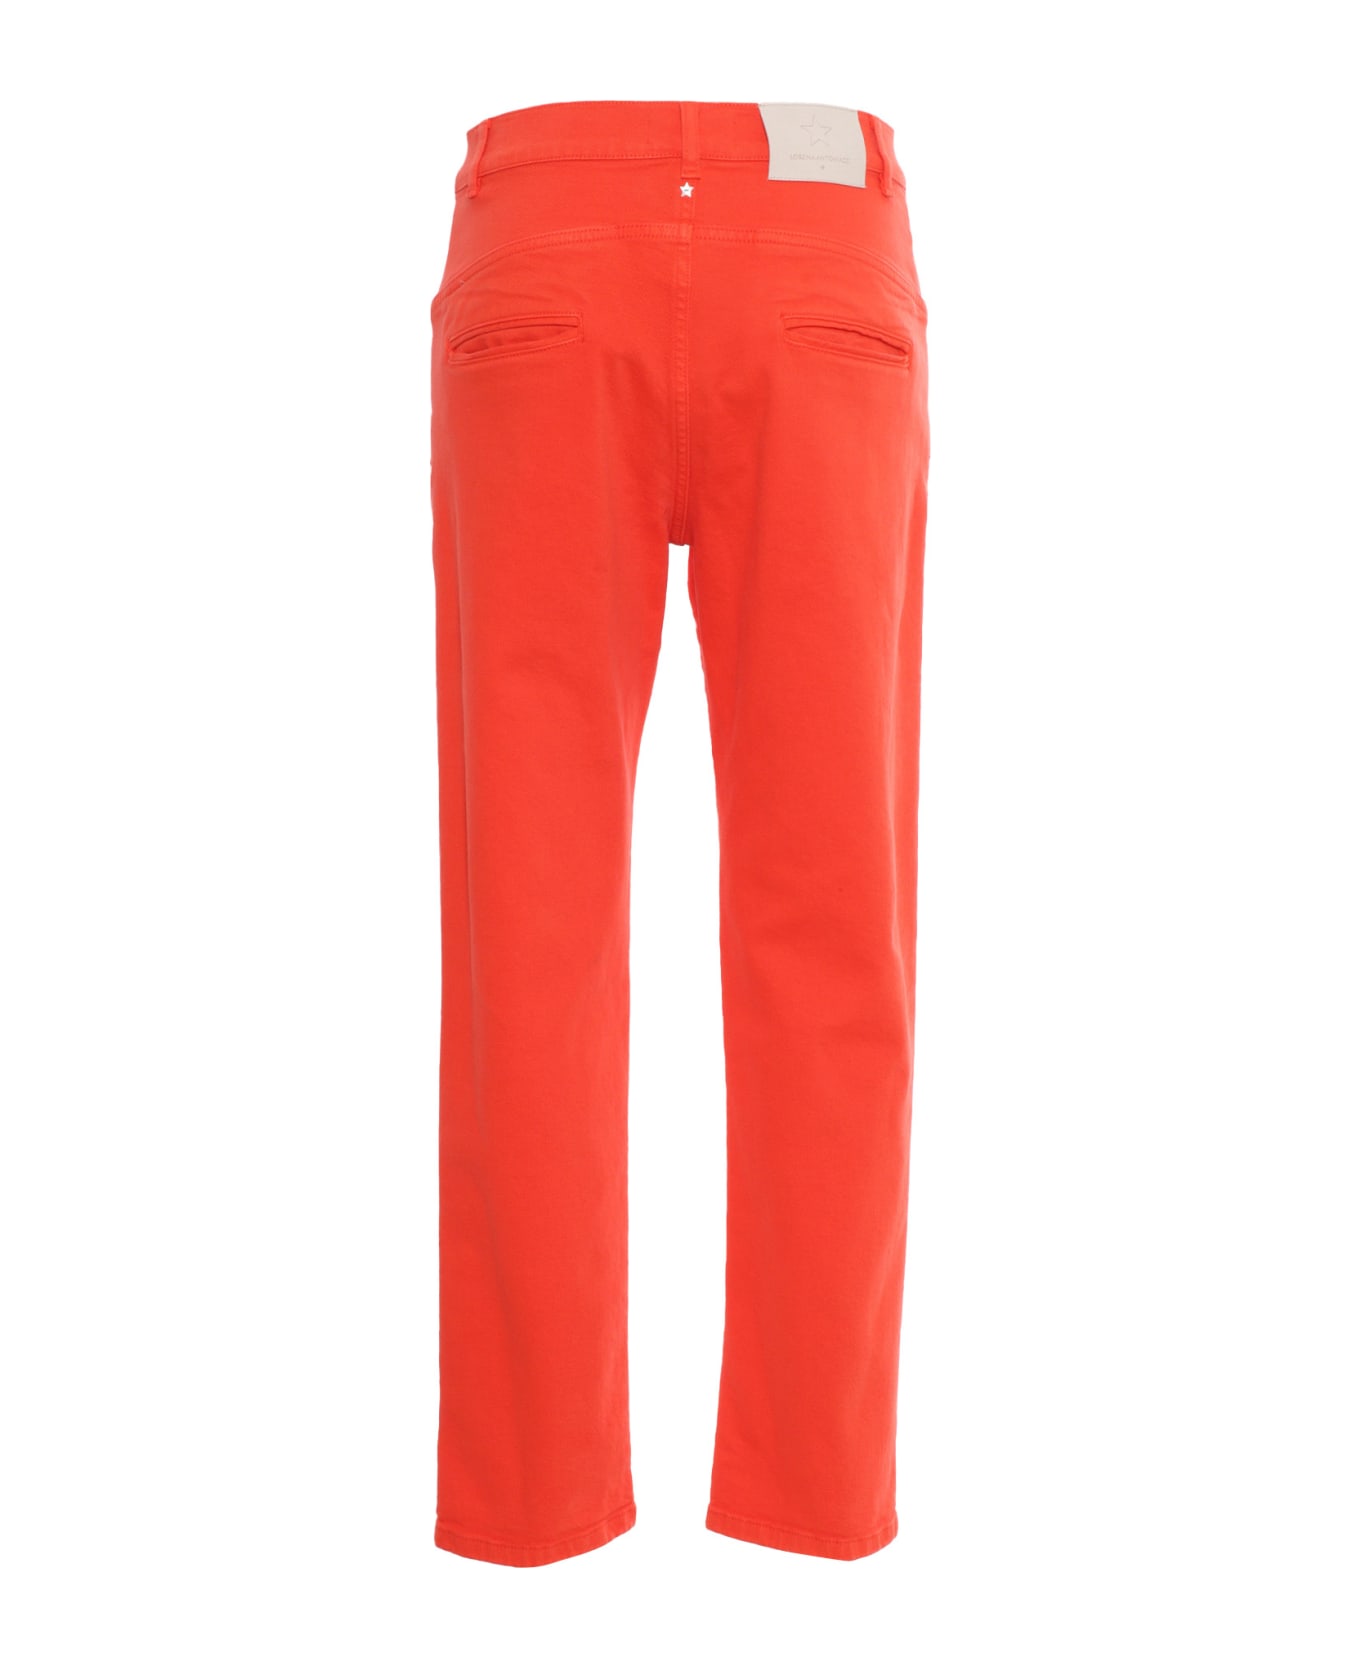 Lorena Antoniazzi Red Trousers - RED ボトムス